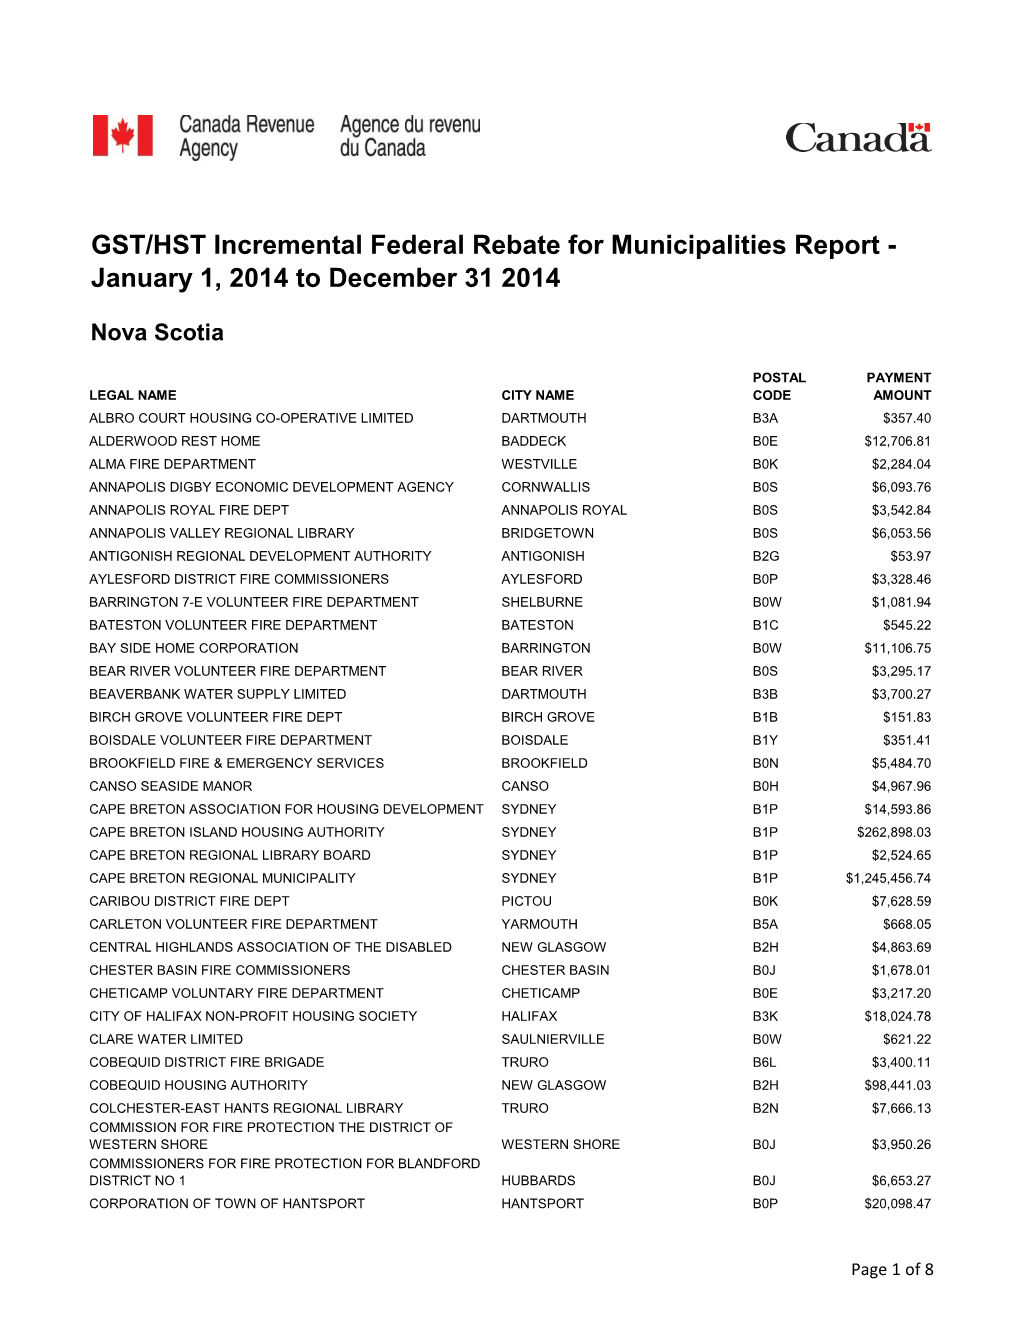 GST/HST Incremental Federal Rebate for Municipalities Report - January 1, 2014 to December 31 2014